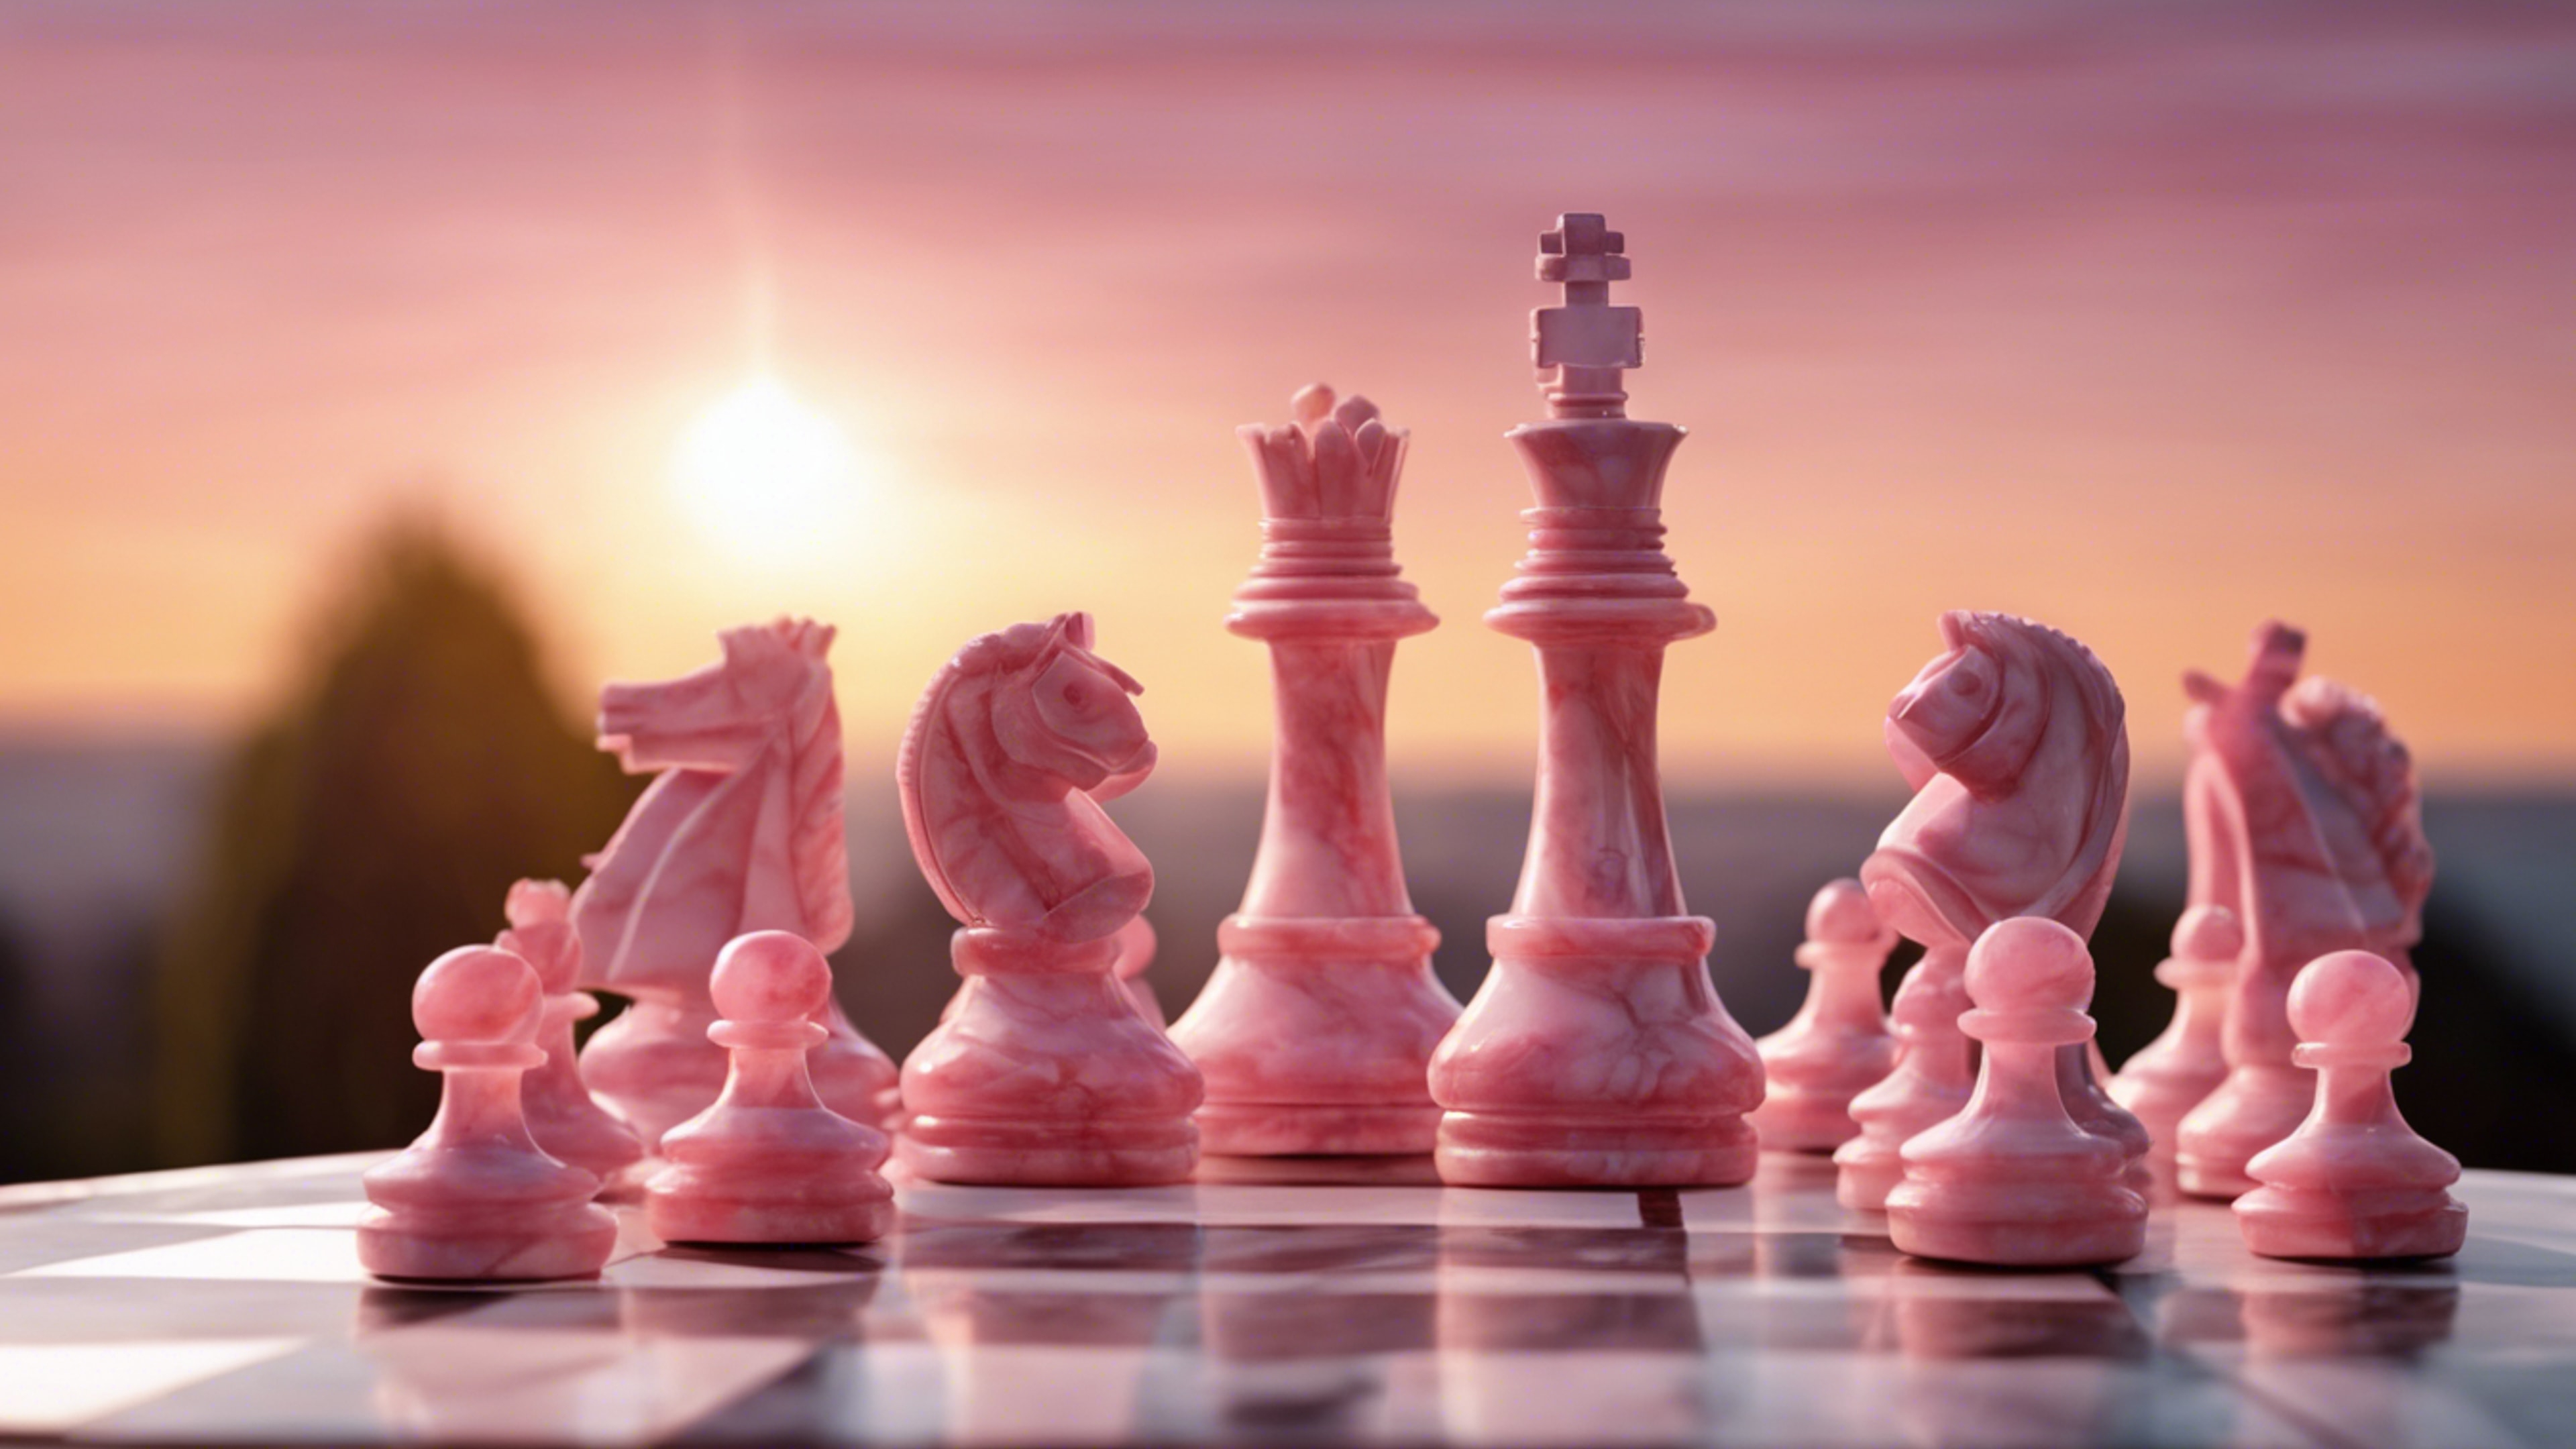 A pink marble chess set on a marble table, ready for a game with a sunset backdrop.壁紙[8d86d26d681842a789eb]